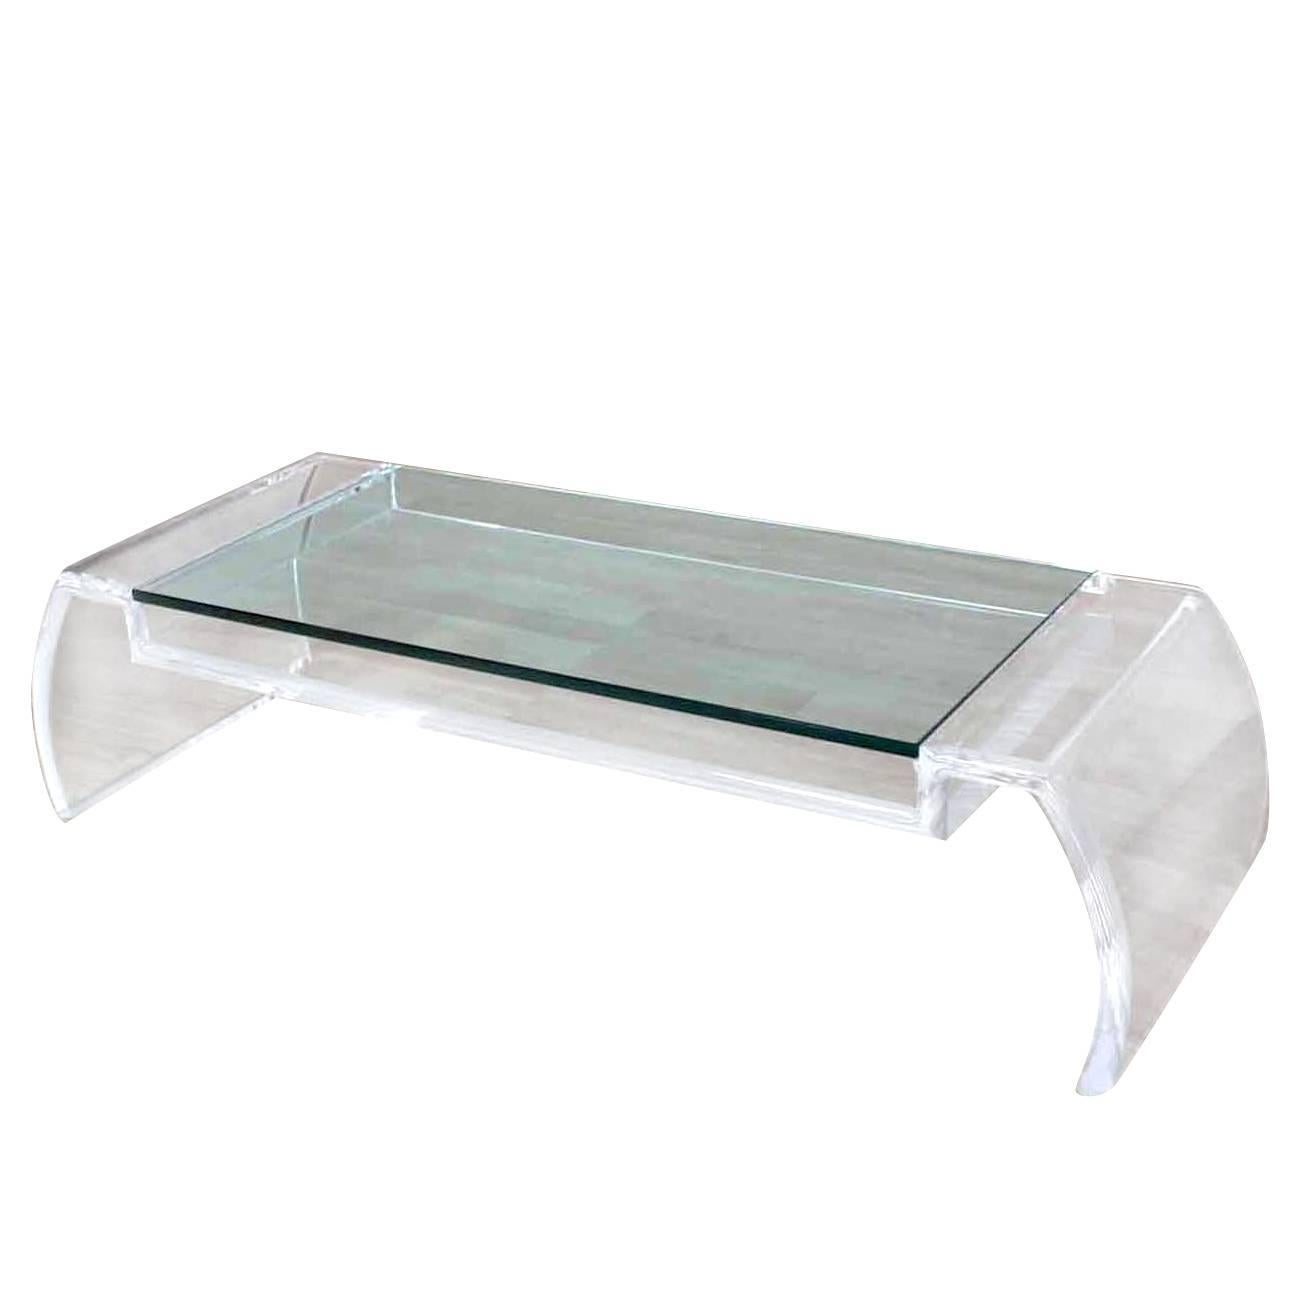 Artist Signed Sculptural Lucite Mid Century Modern Coffee Table Glass Top